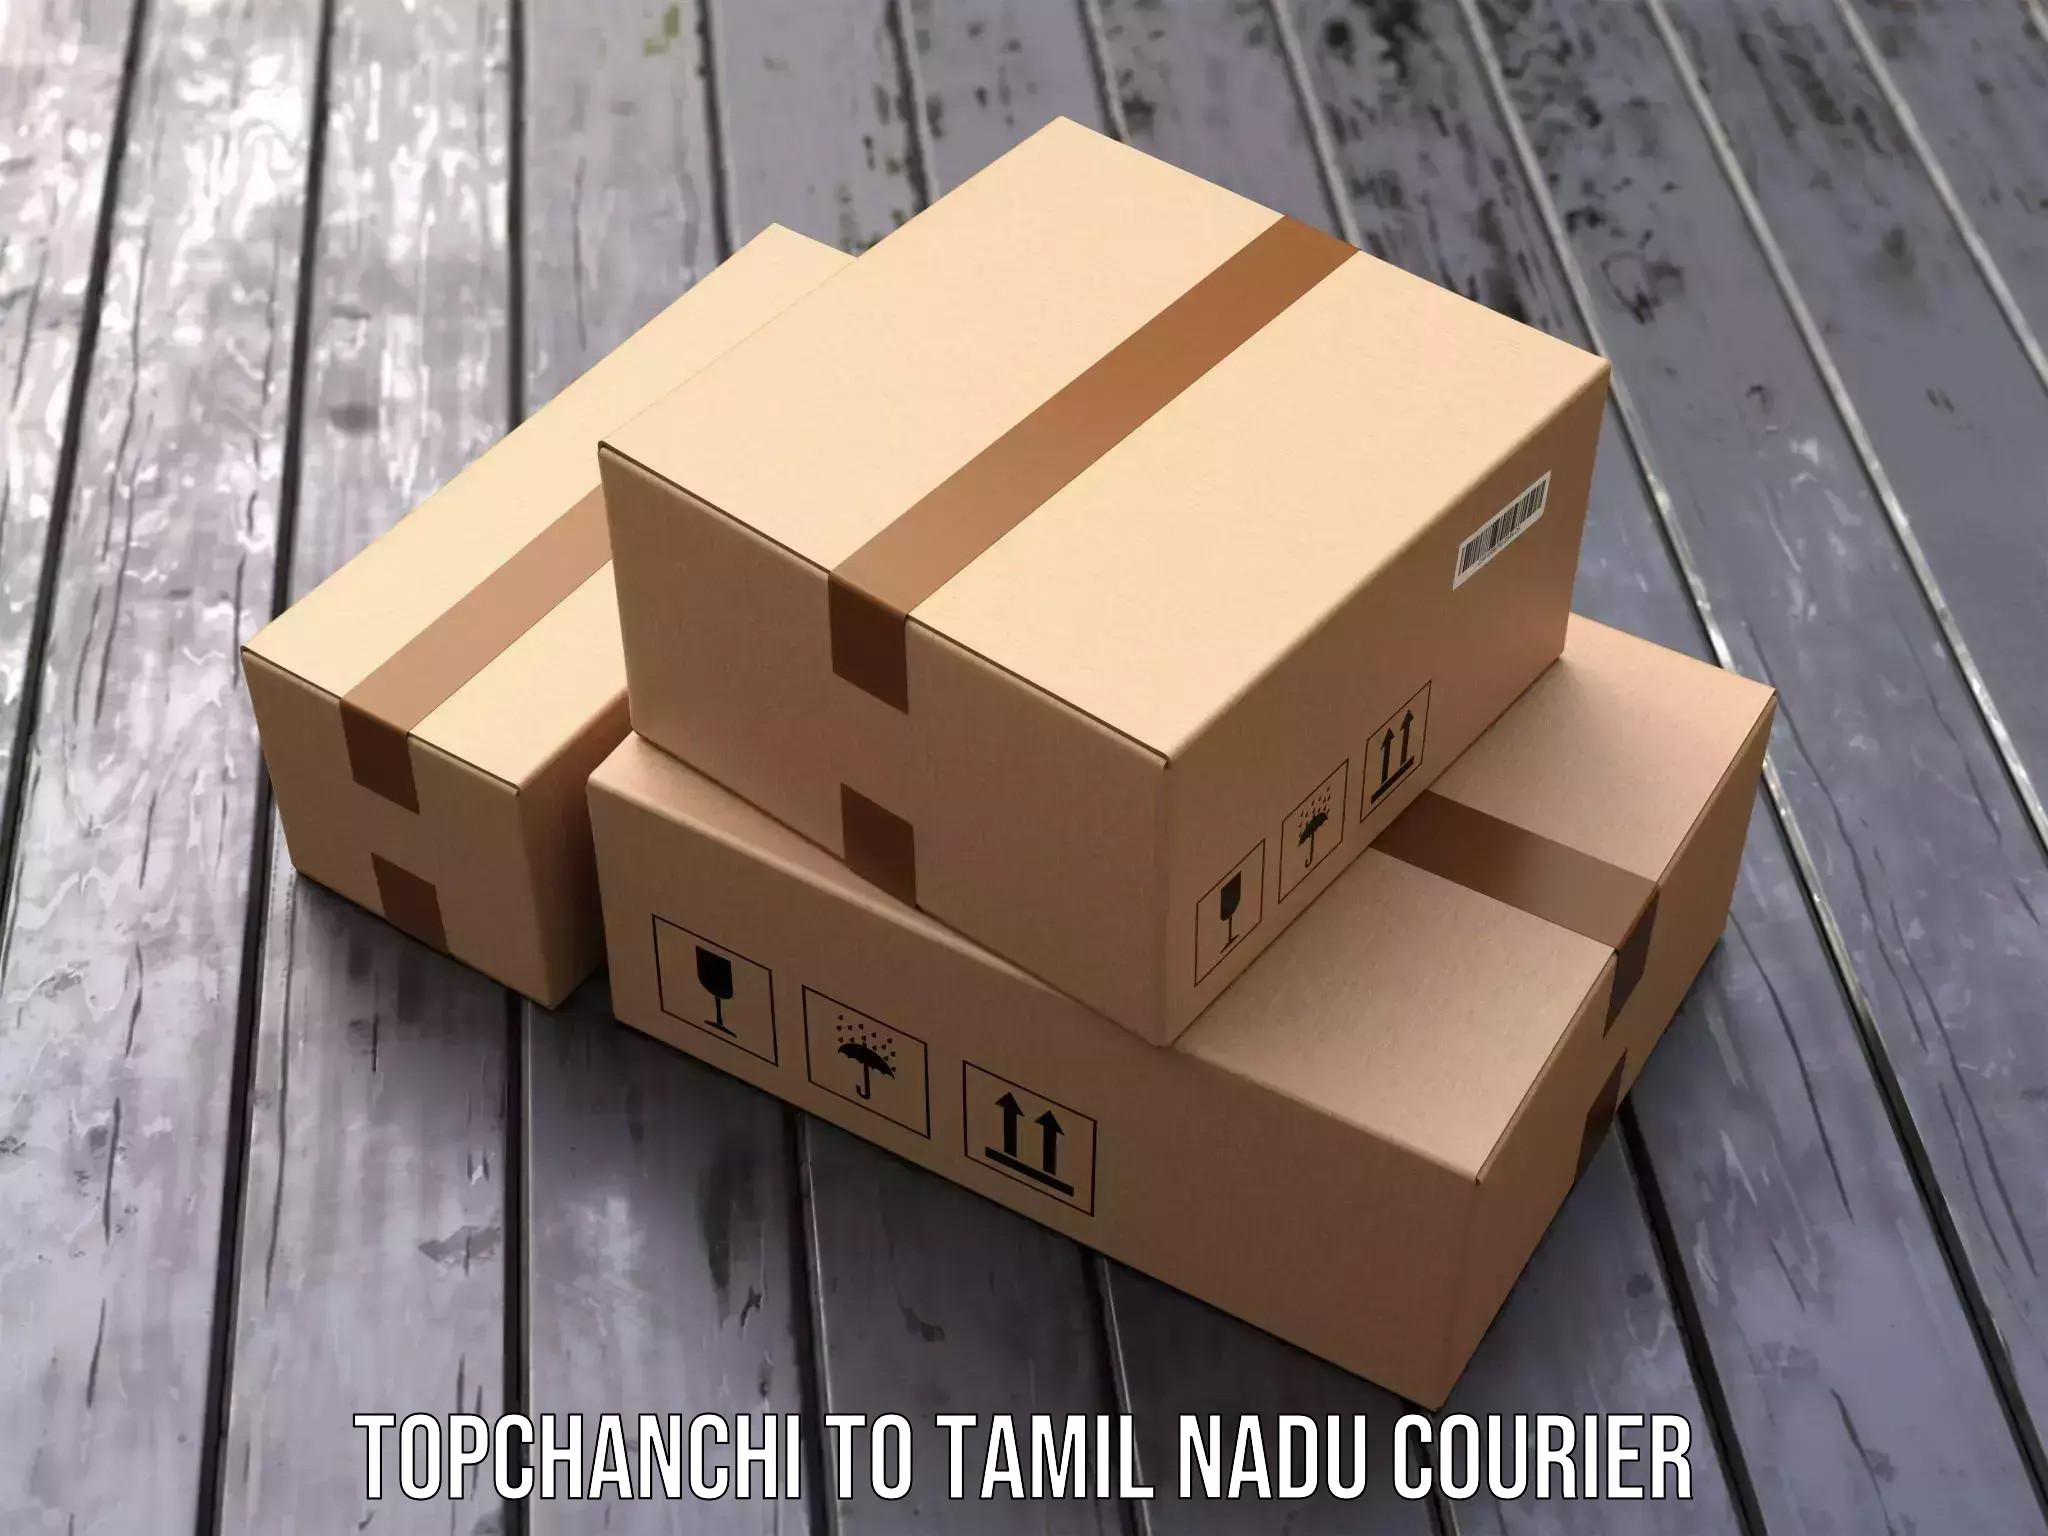 Tech-enabled shipping Topchanchi to Melur